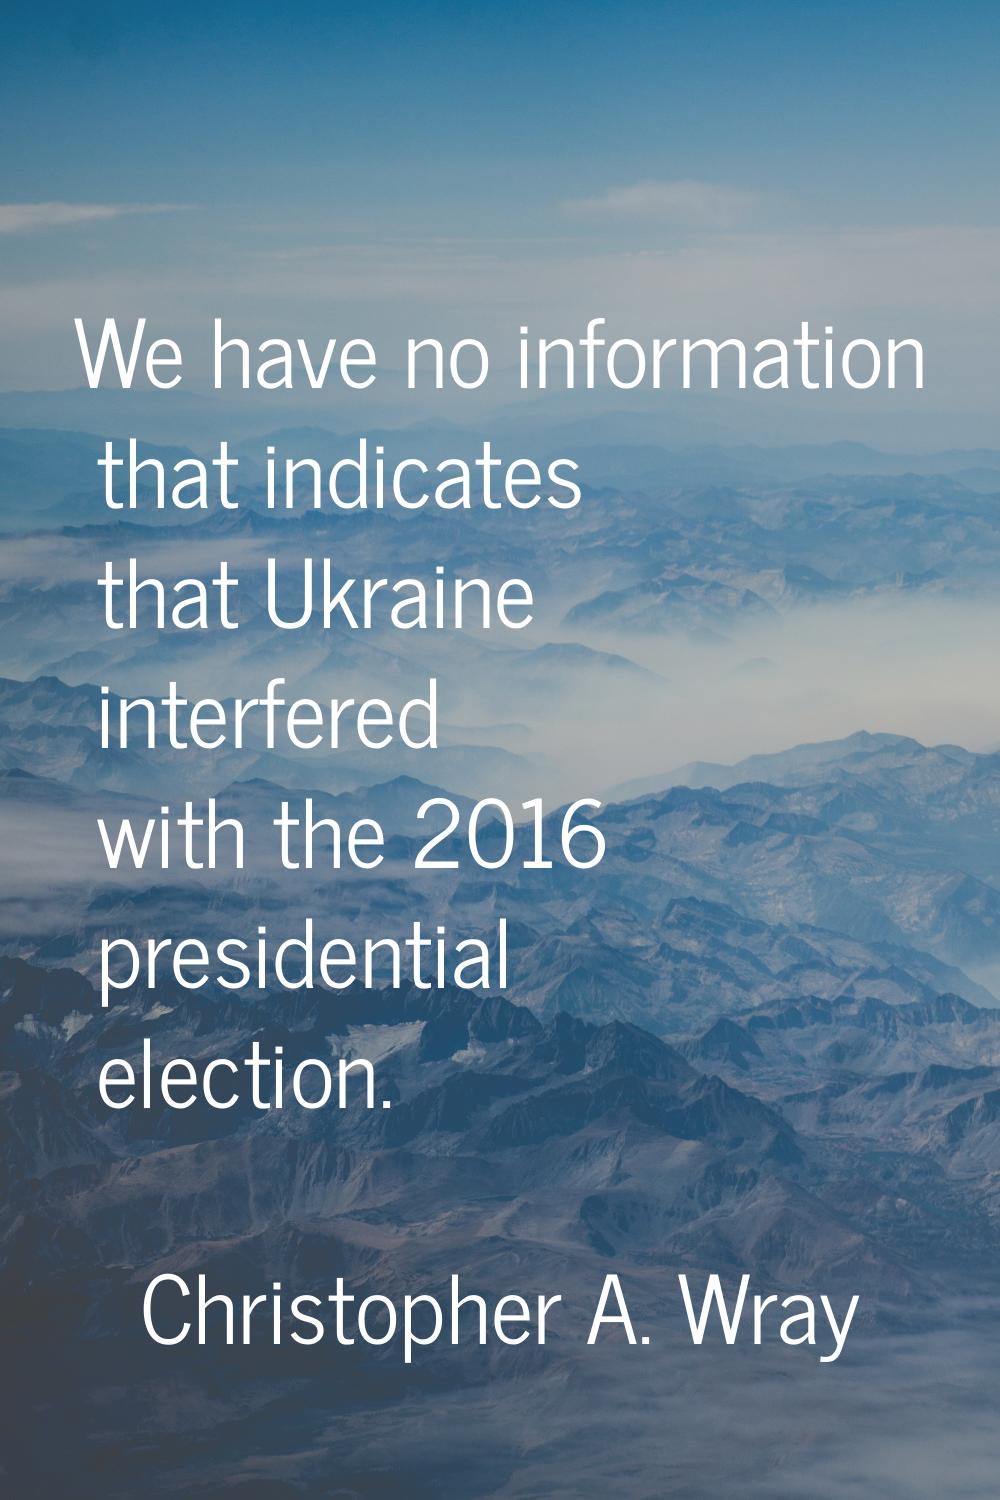 We have no information that indicates that Ukraine interfered with the 2016 presidential election.